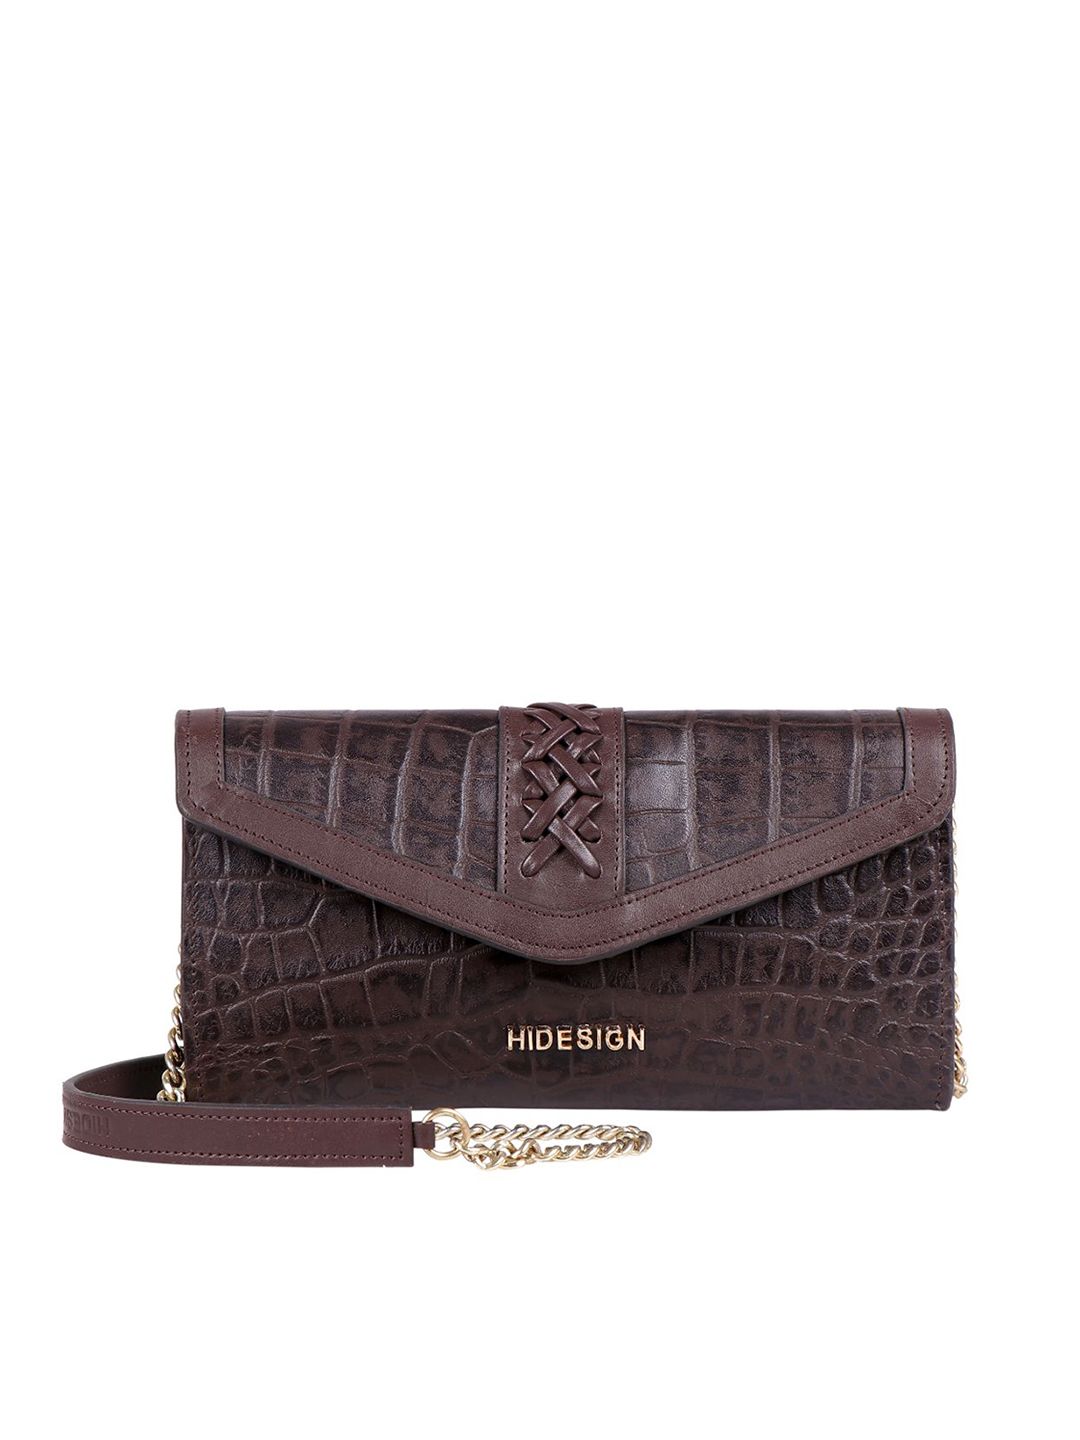 Hidesign Women Brown Textured Leather Envelope with Sling Strap Price in India